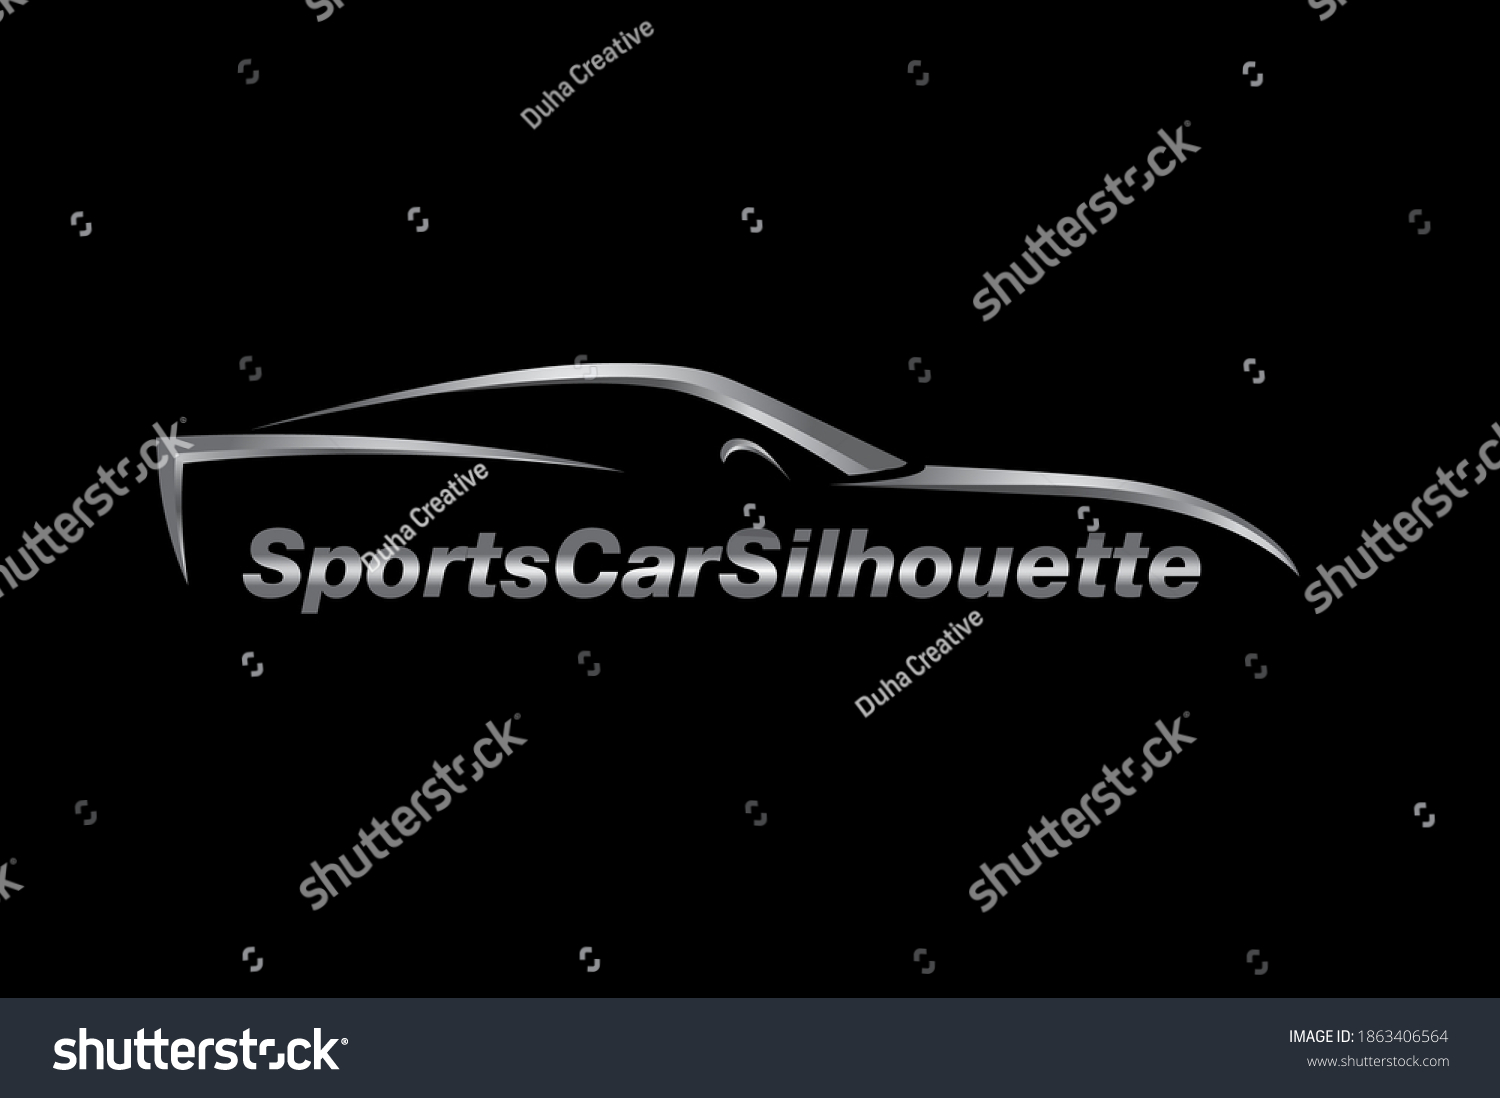 SVG of Silhouette of Sports Car , vector image of sports car could be used as logo, mark , etc. svg